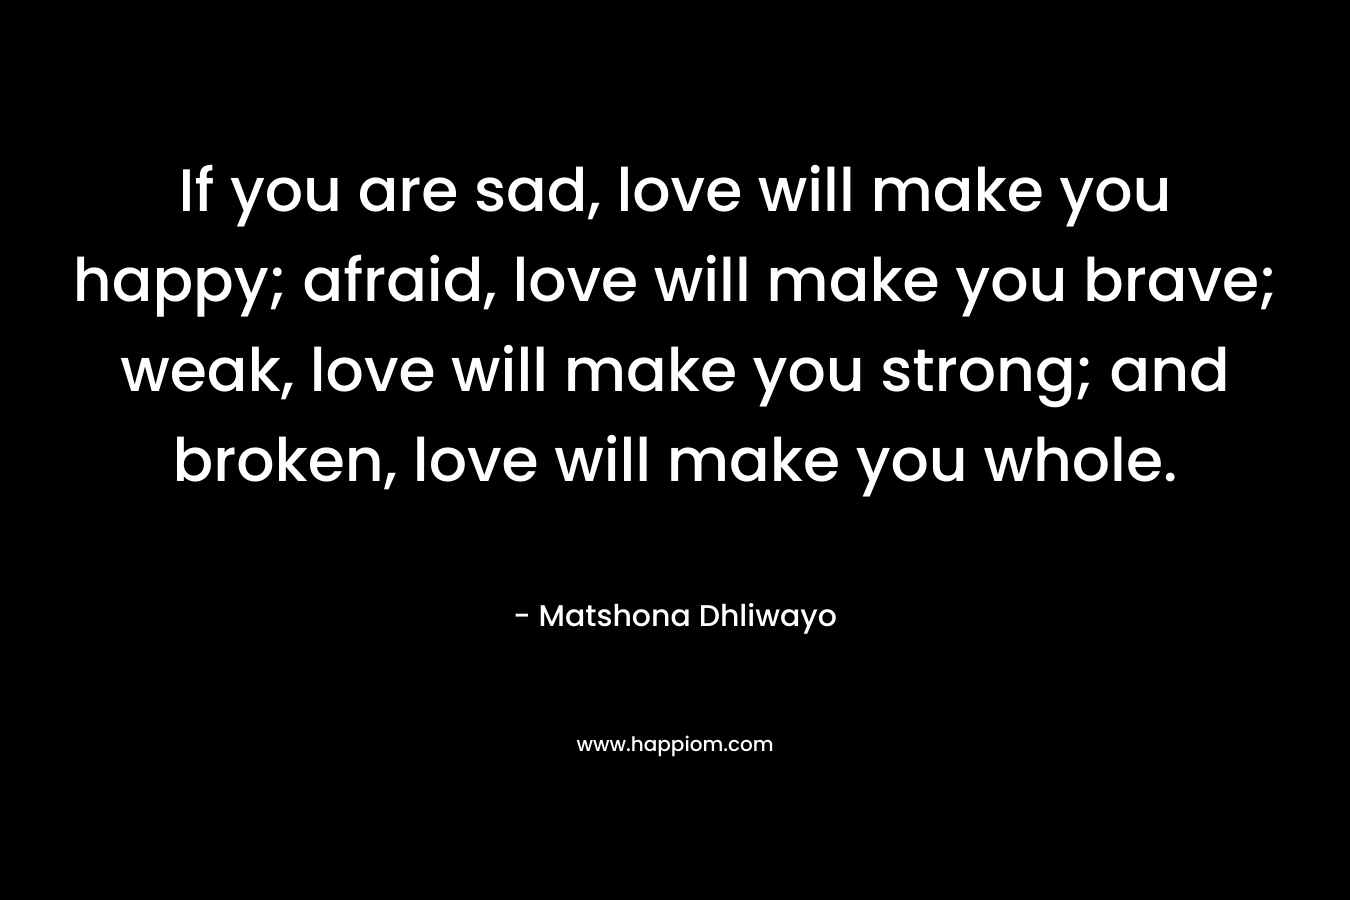 If you are sad, love will make you happy; afraid, love will make you brave; weak, love will make you strong; and broken, love will make you whole.